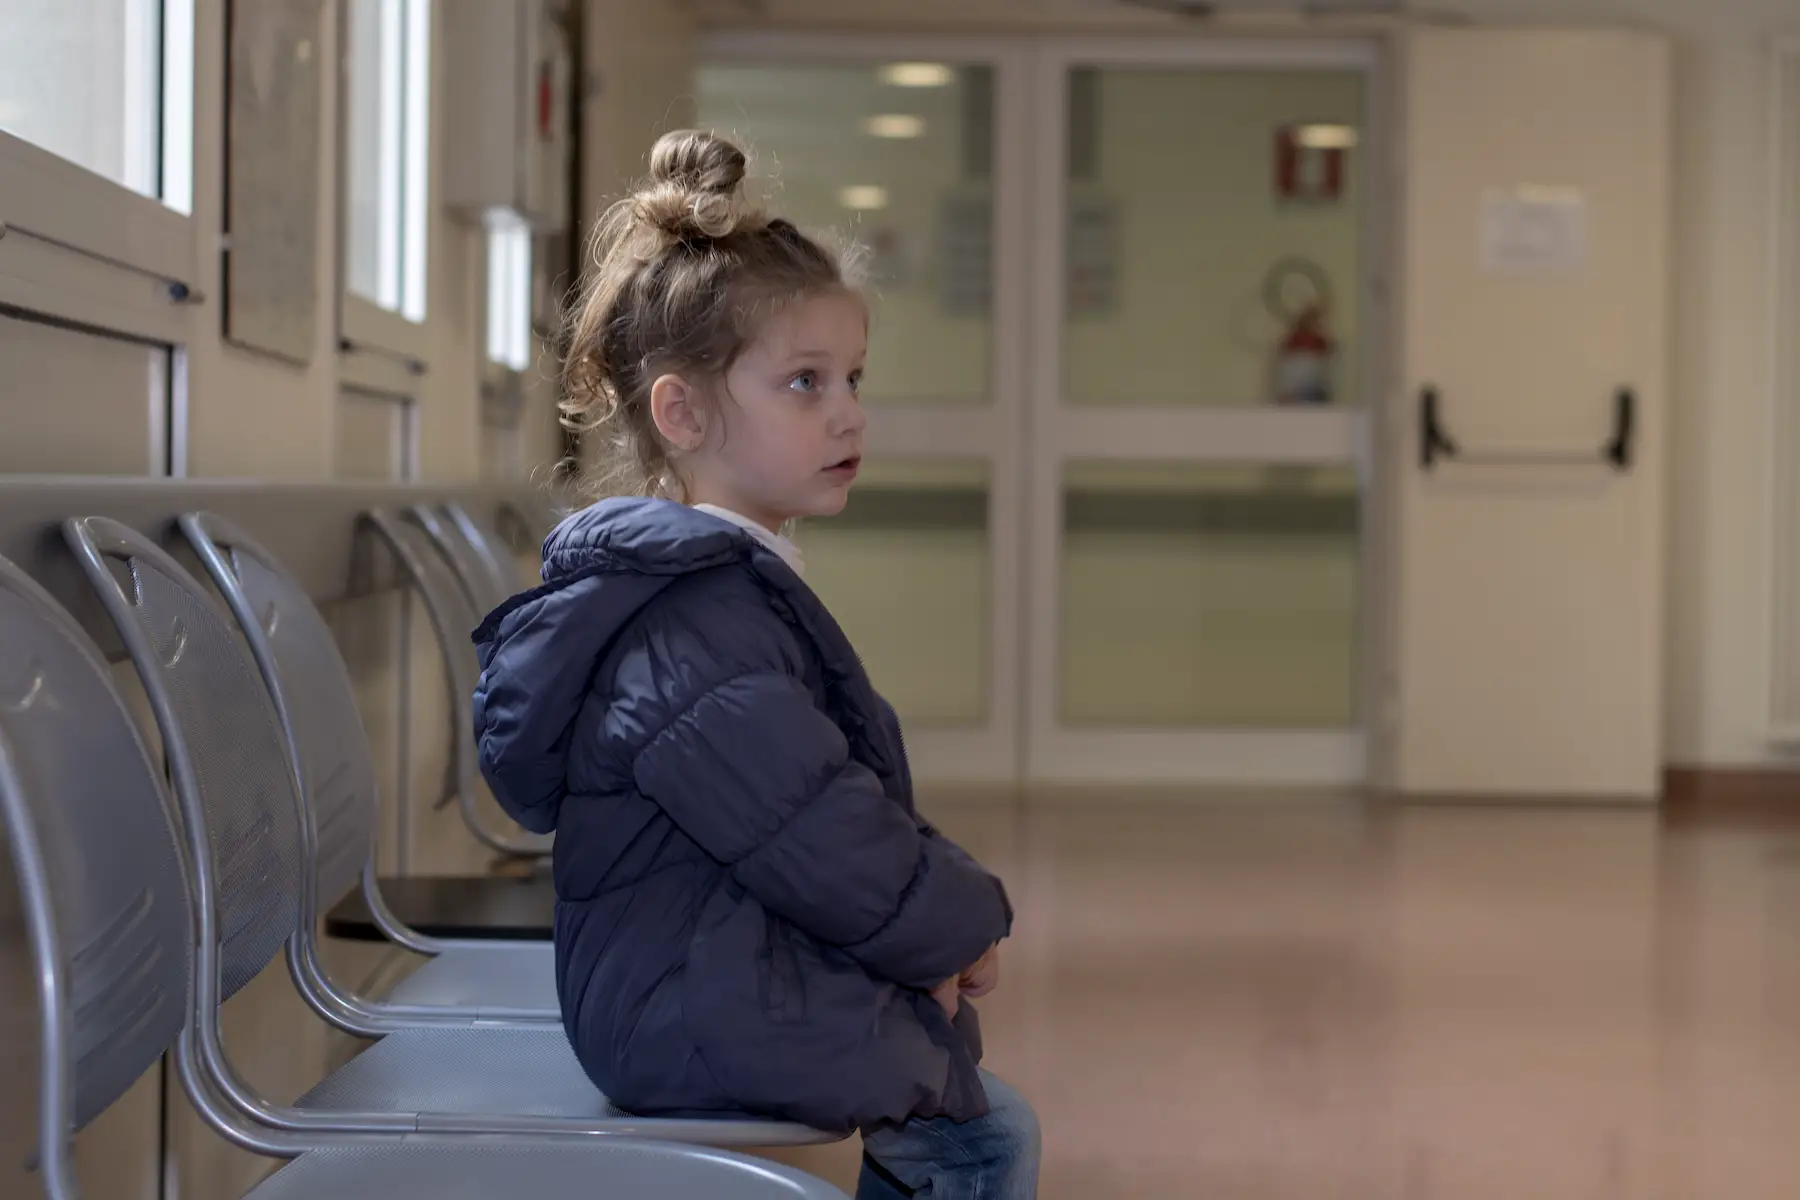 A little girl sits alone in the waiting room of a hospital's emergency room